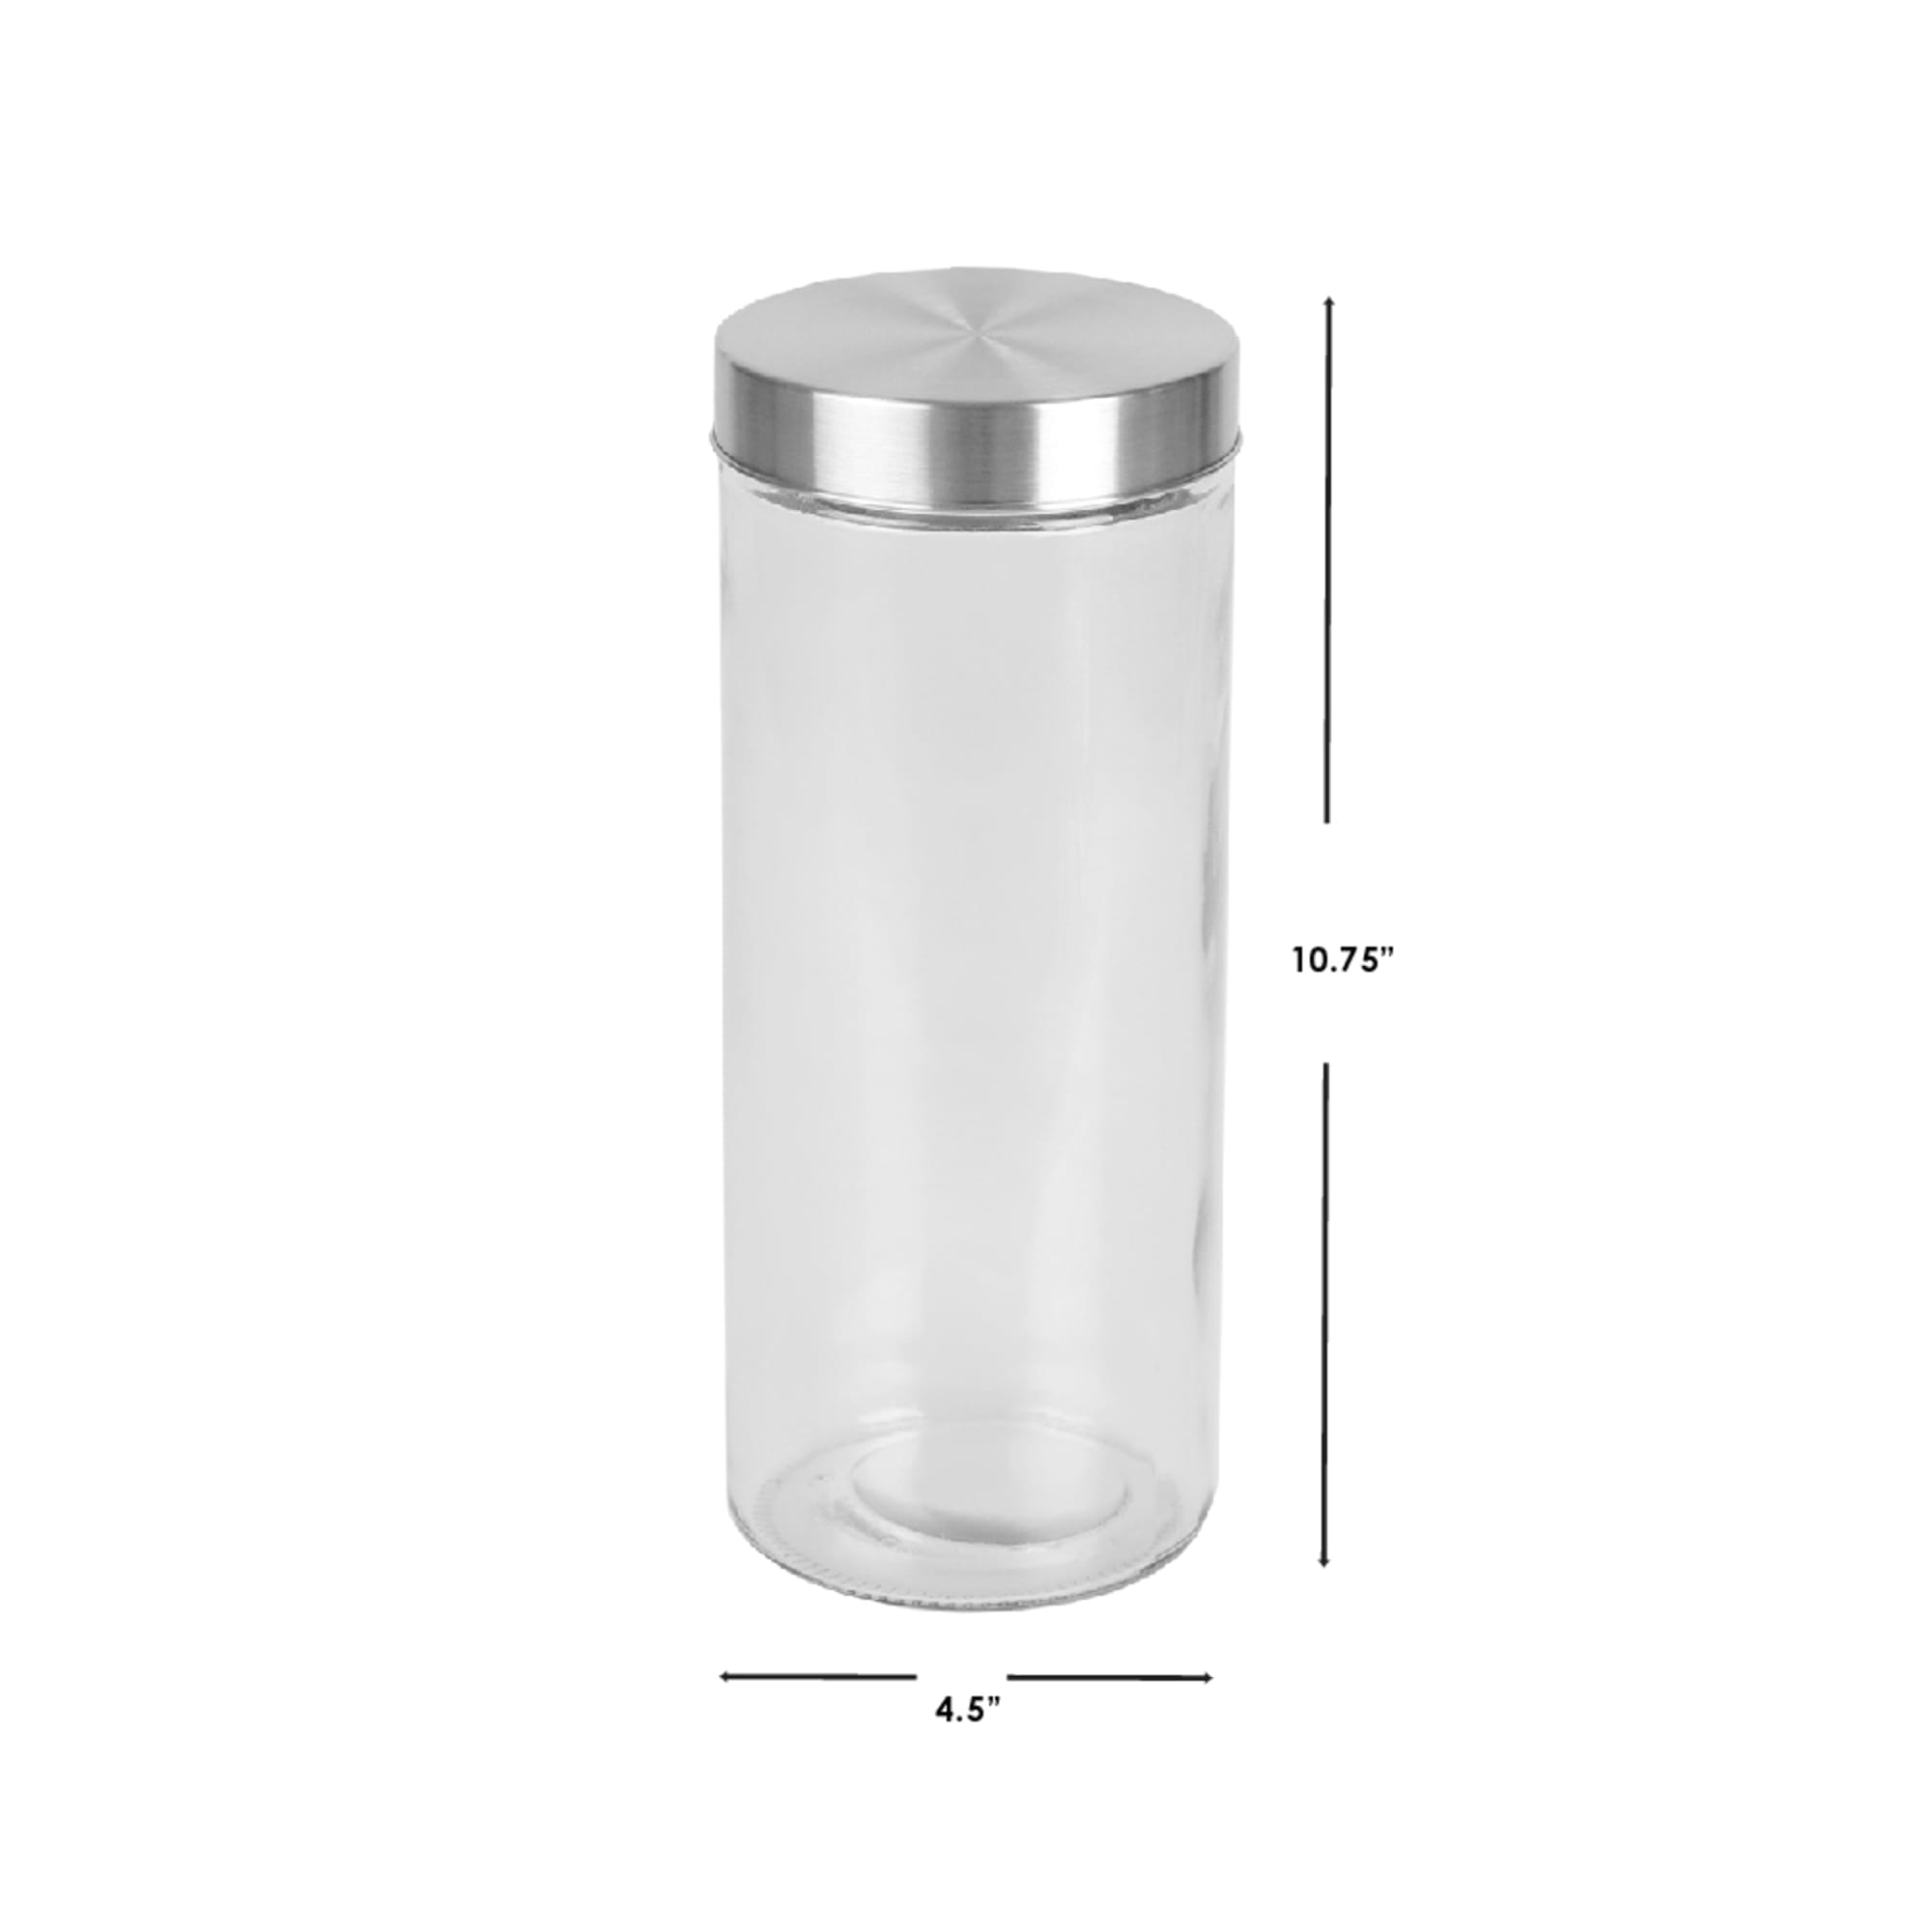 Home Basics  X-Large 67oz. Round Glass Canister with Air-Tight Metal Lid, Clear $4.00 EACH, CASE PACK OF 12